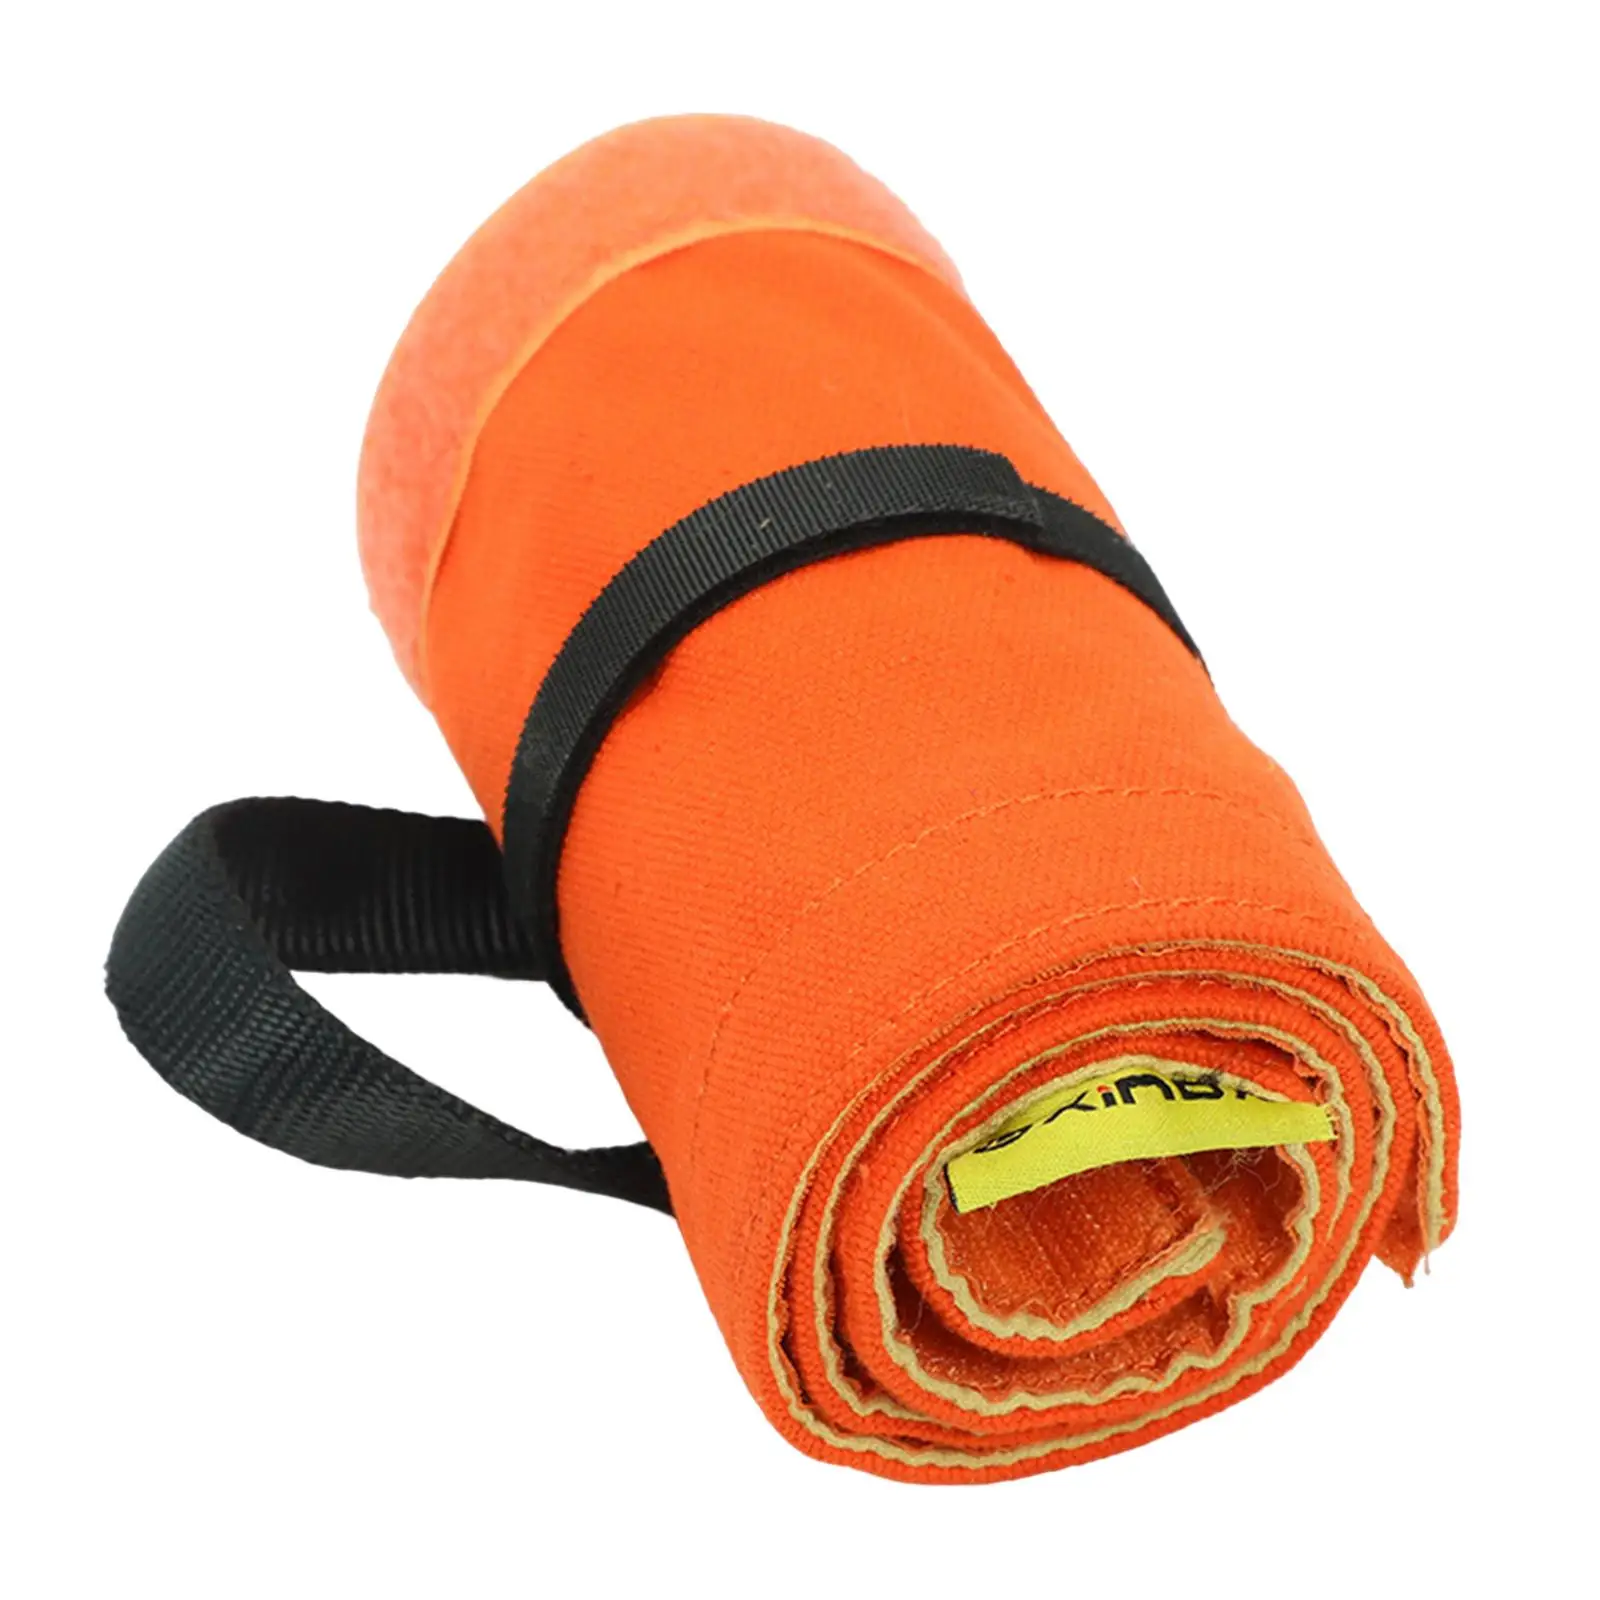 Rope Protector Universal Rope Sheath for Abseiling Rappelling Mountaineering